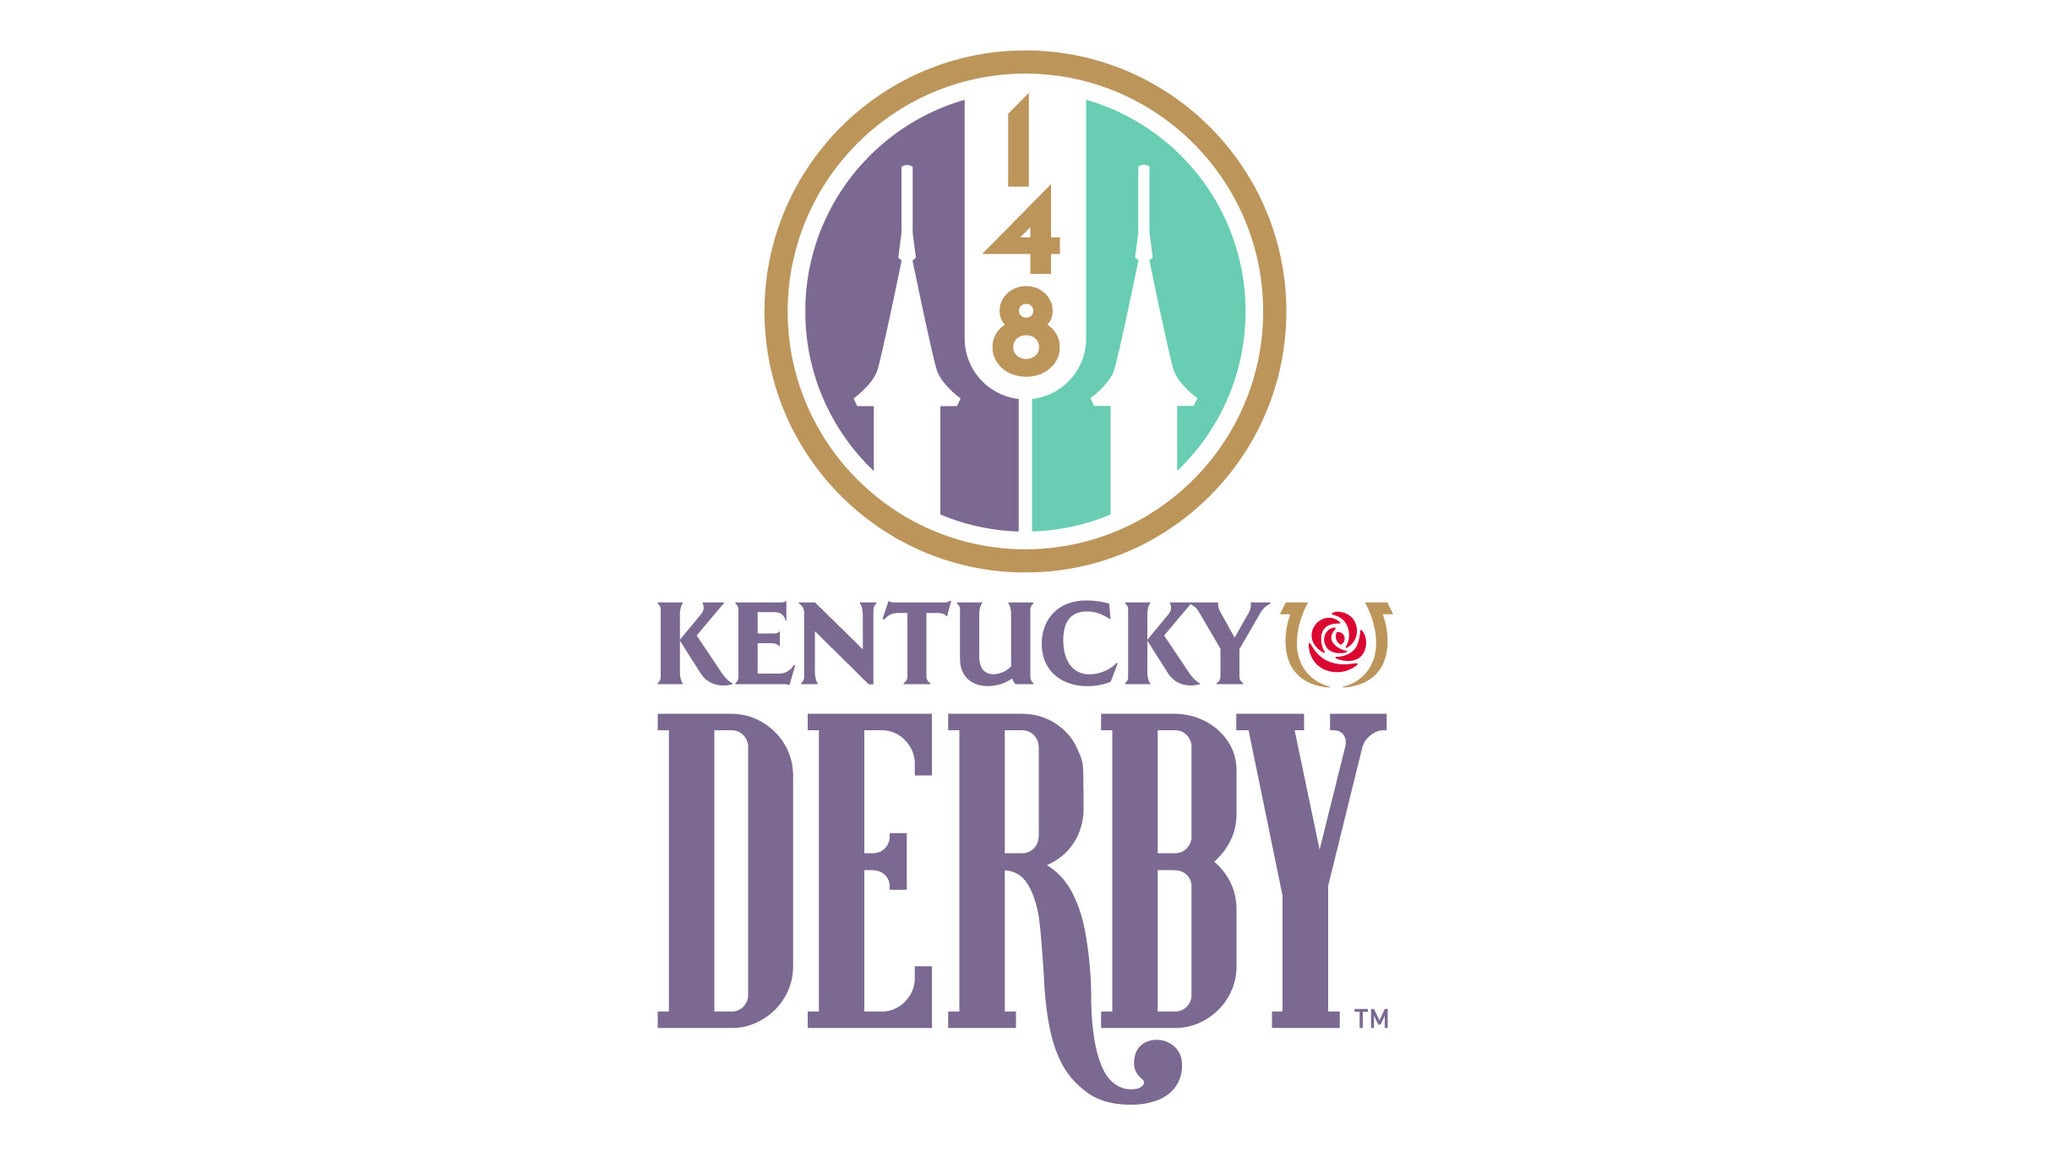 148th Kentucky Derby - Infield General Admission *No Front Side Access in Louisville promo photo for Discount Purchase Pricing presale offer code